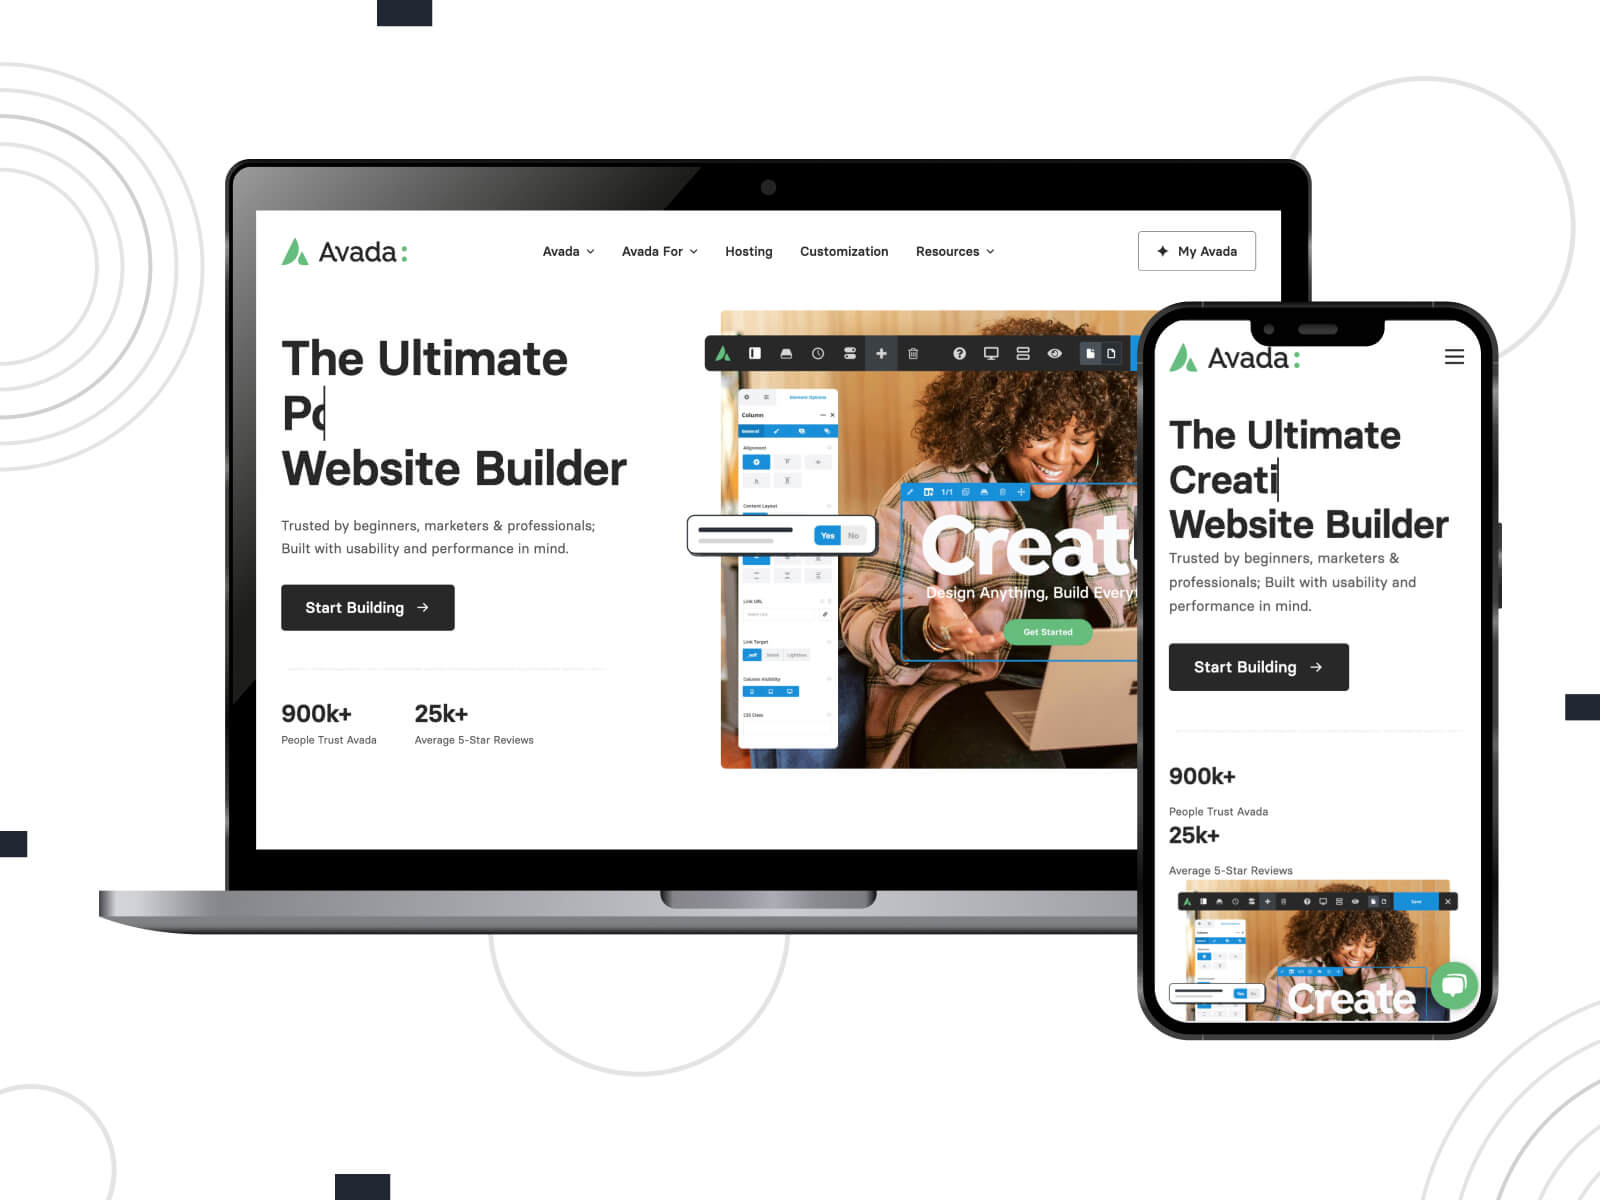 Snapshot of Avada - light, inviting, this premium theme stands out as one of the top WordPress themes with its advanced features for professional sites in light gray, dark gray, and dim gray color combination.